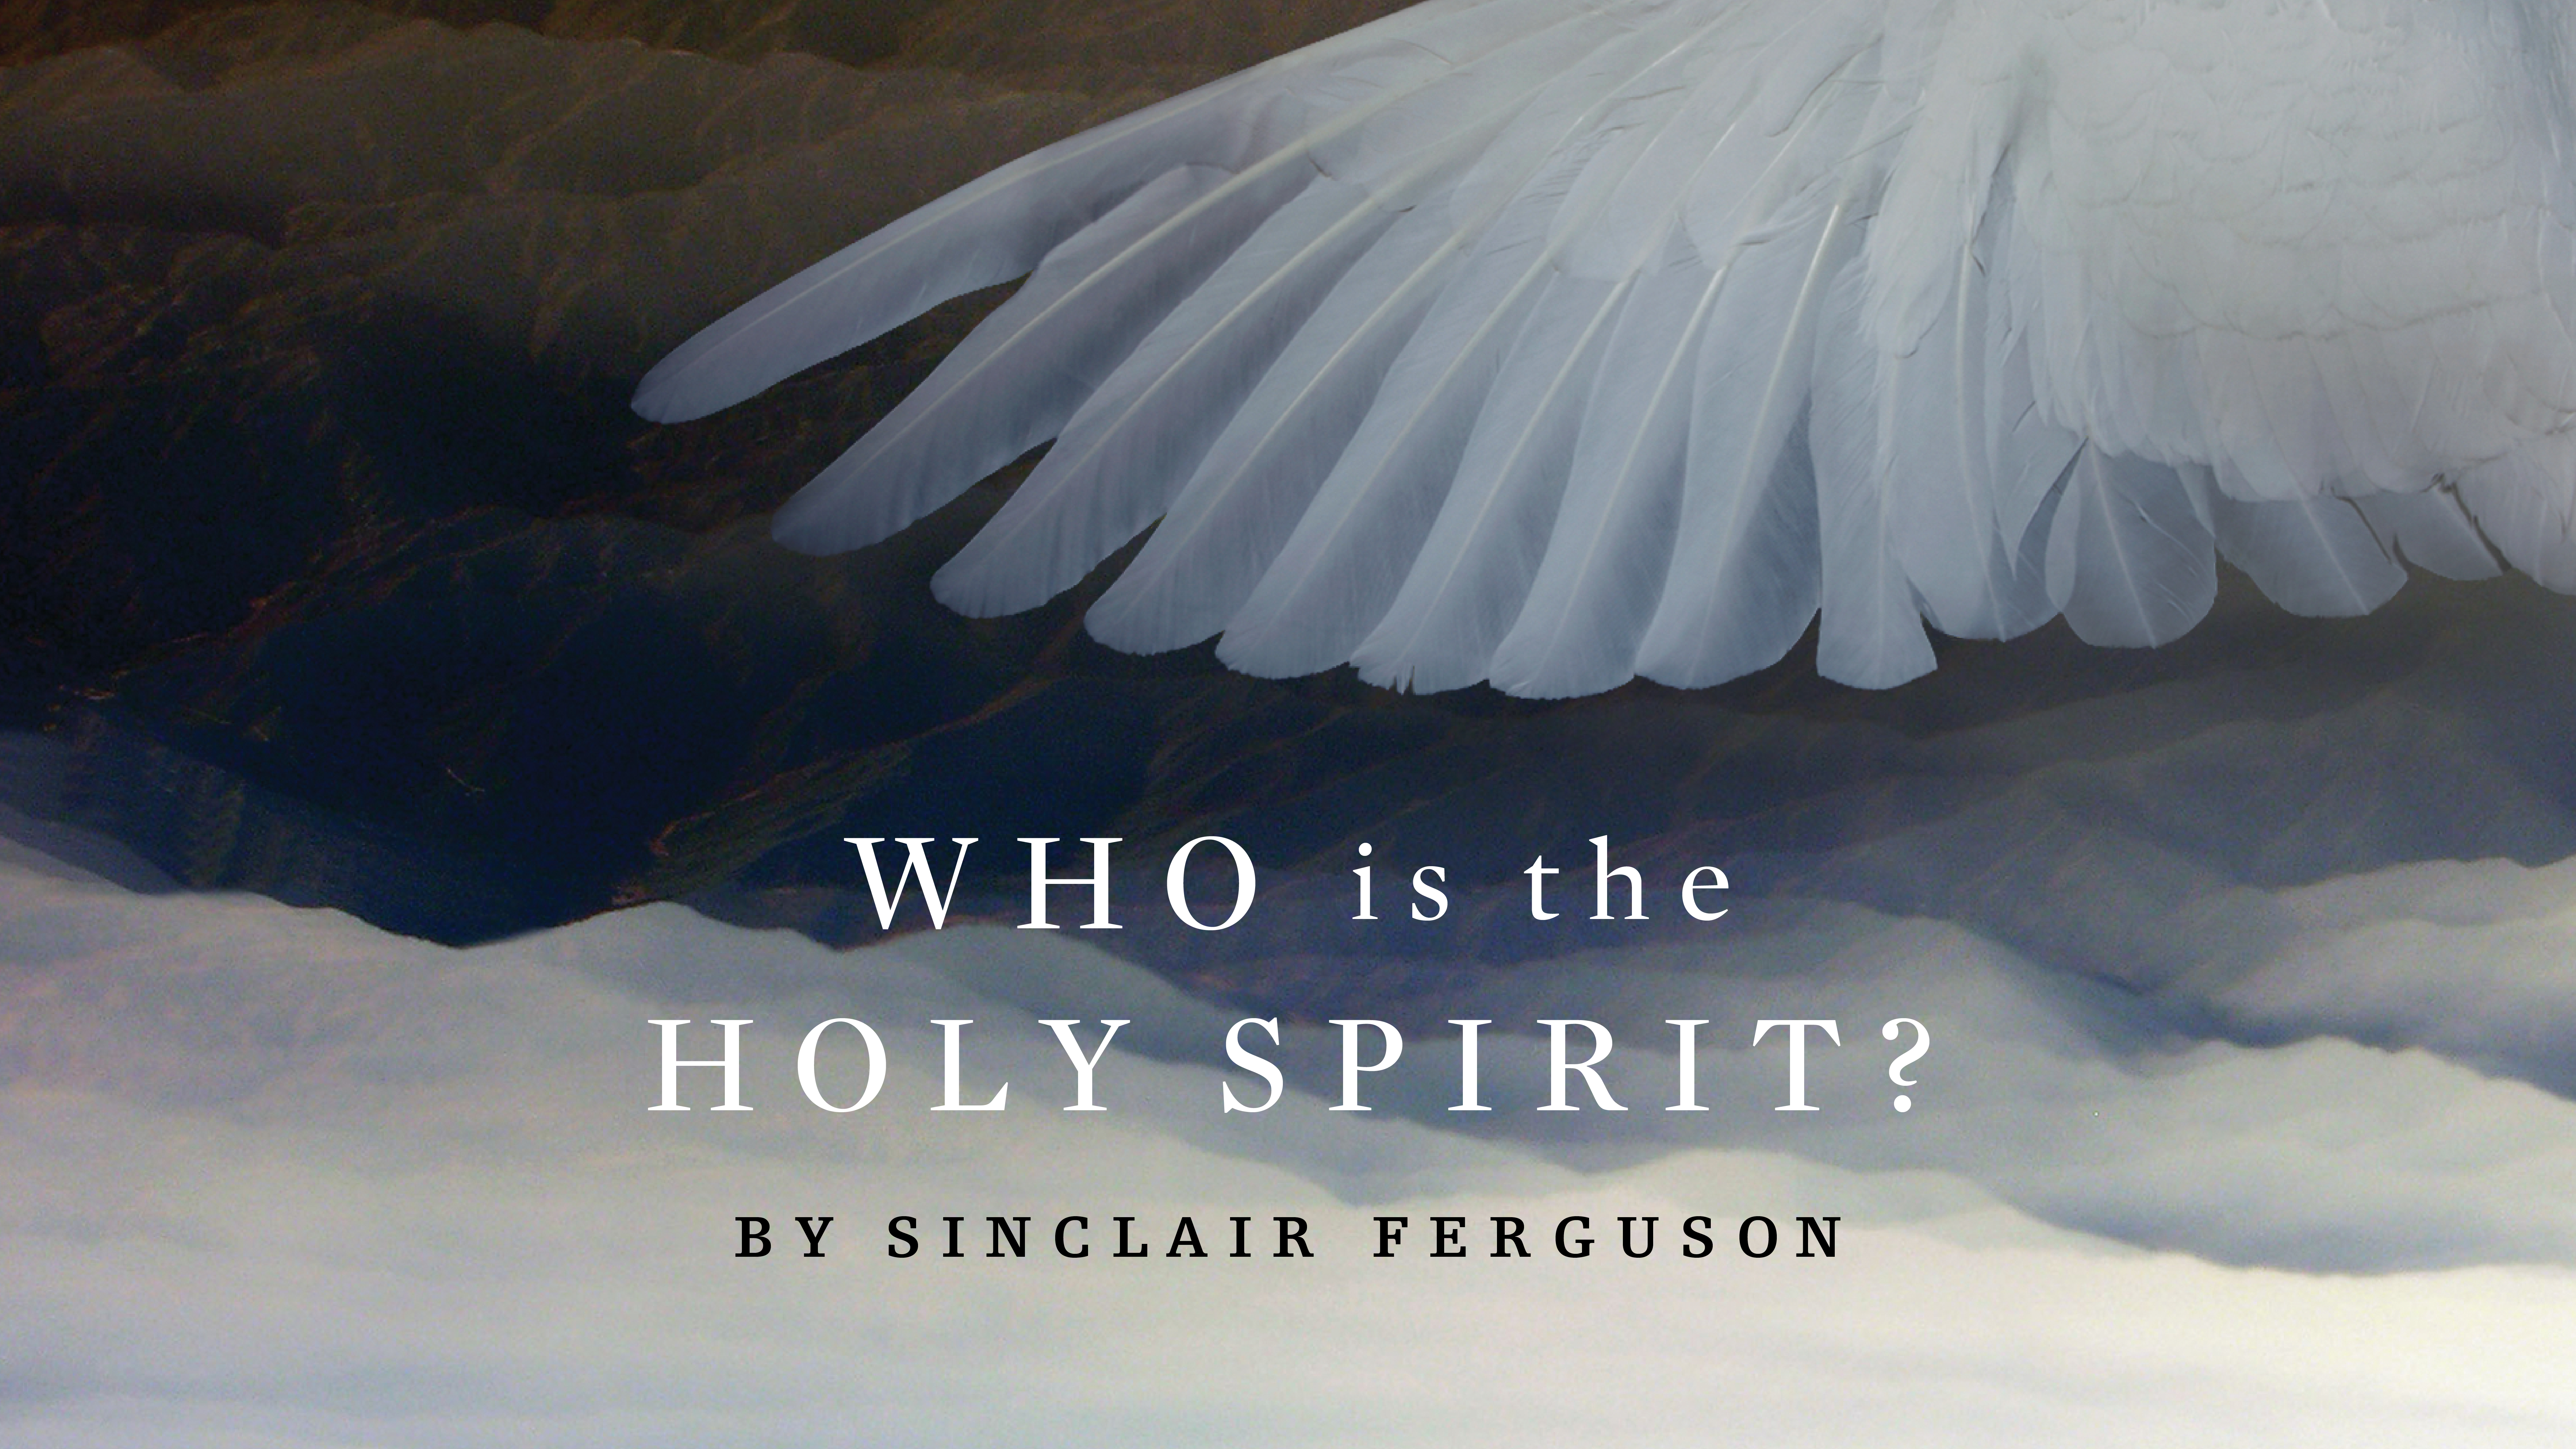 Who Is the Holy Spirit? by Sinclair Ferguson